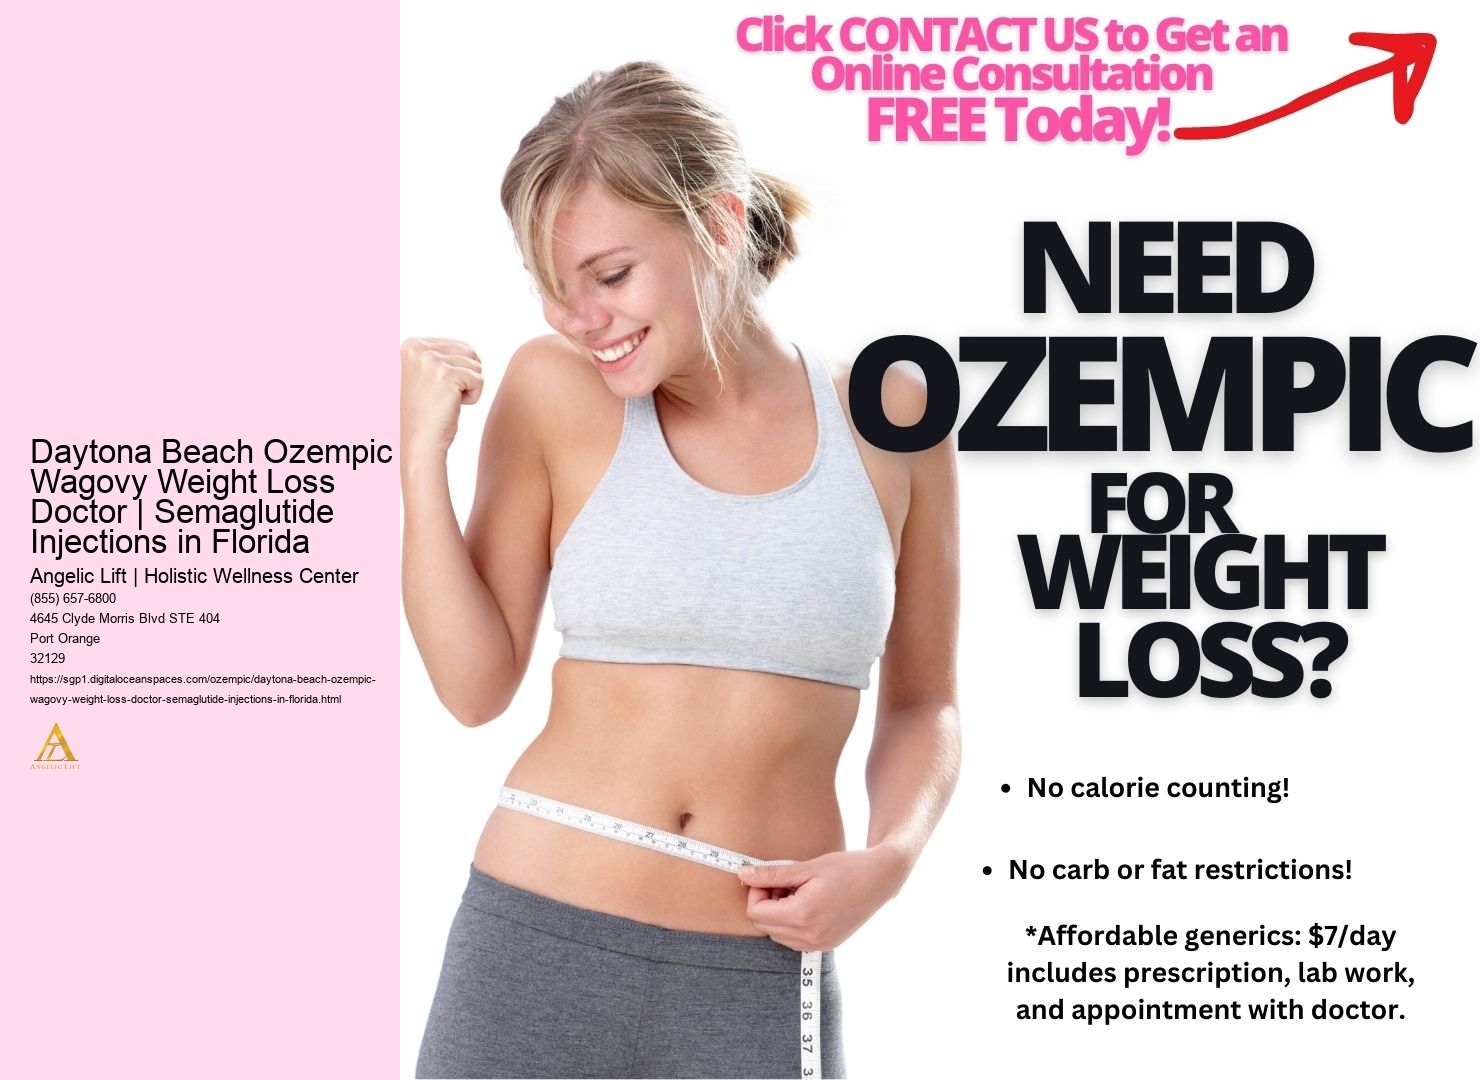 Daytona Beach Ozempic & Wagovy Weight Loss Doctor | Semaglutide Injections in Florida